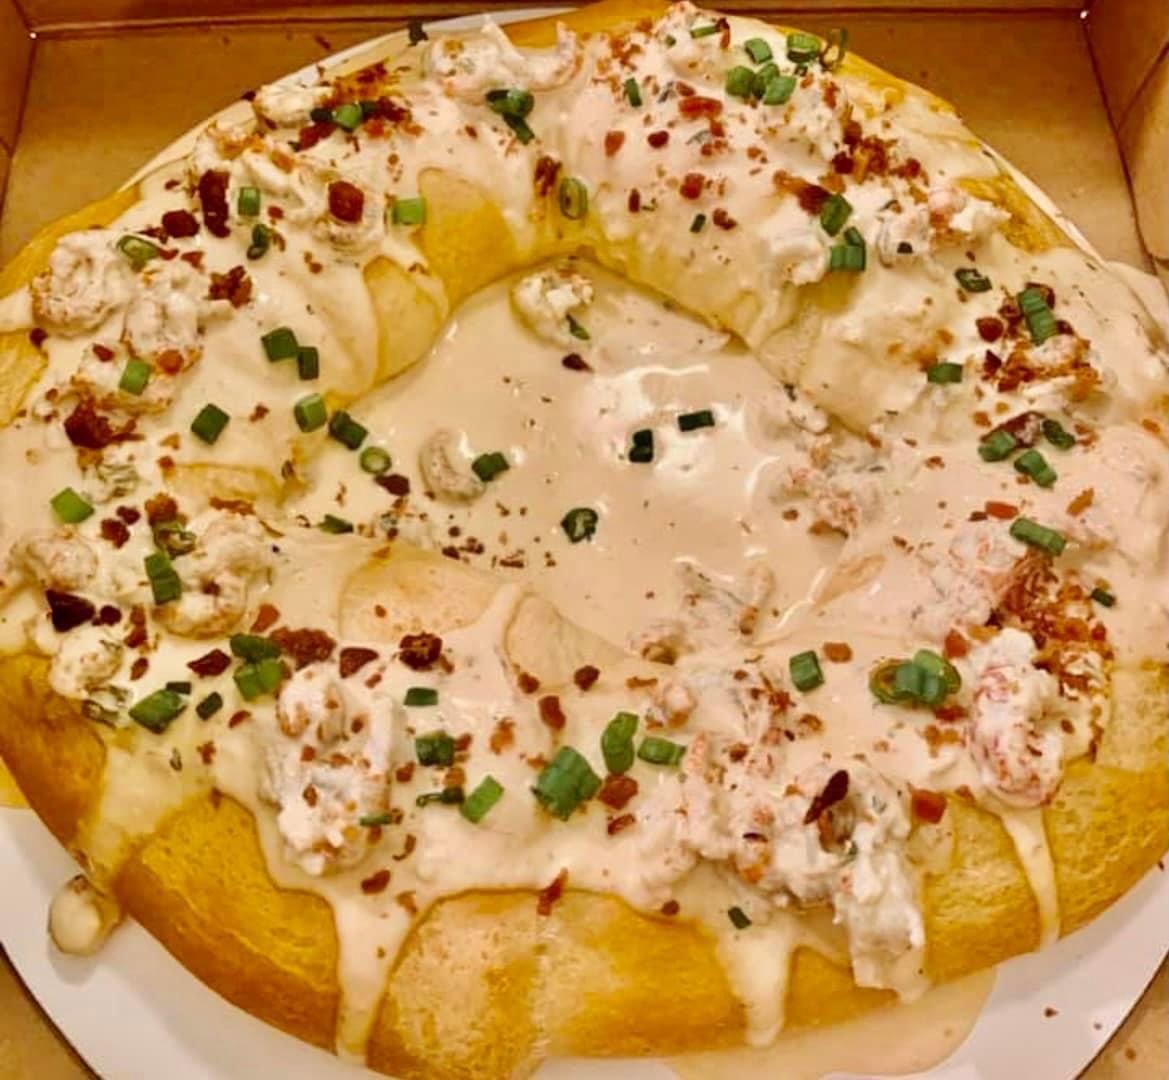 The Crawfish King Cake comes with a creamy crawfish gravy. After warming the King Cake in the oven it is topped with the gravy before being enjoyed. The Crawfish King Cake is $50 and is available for pre-order by calling Gourmet Goodies (251) 239-6325.